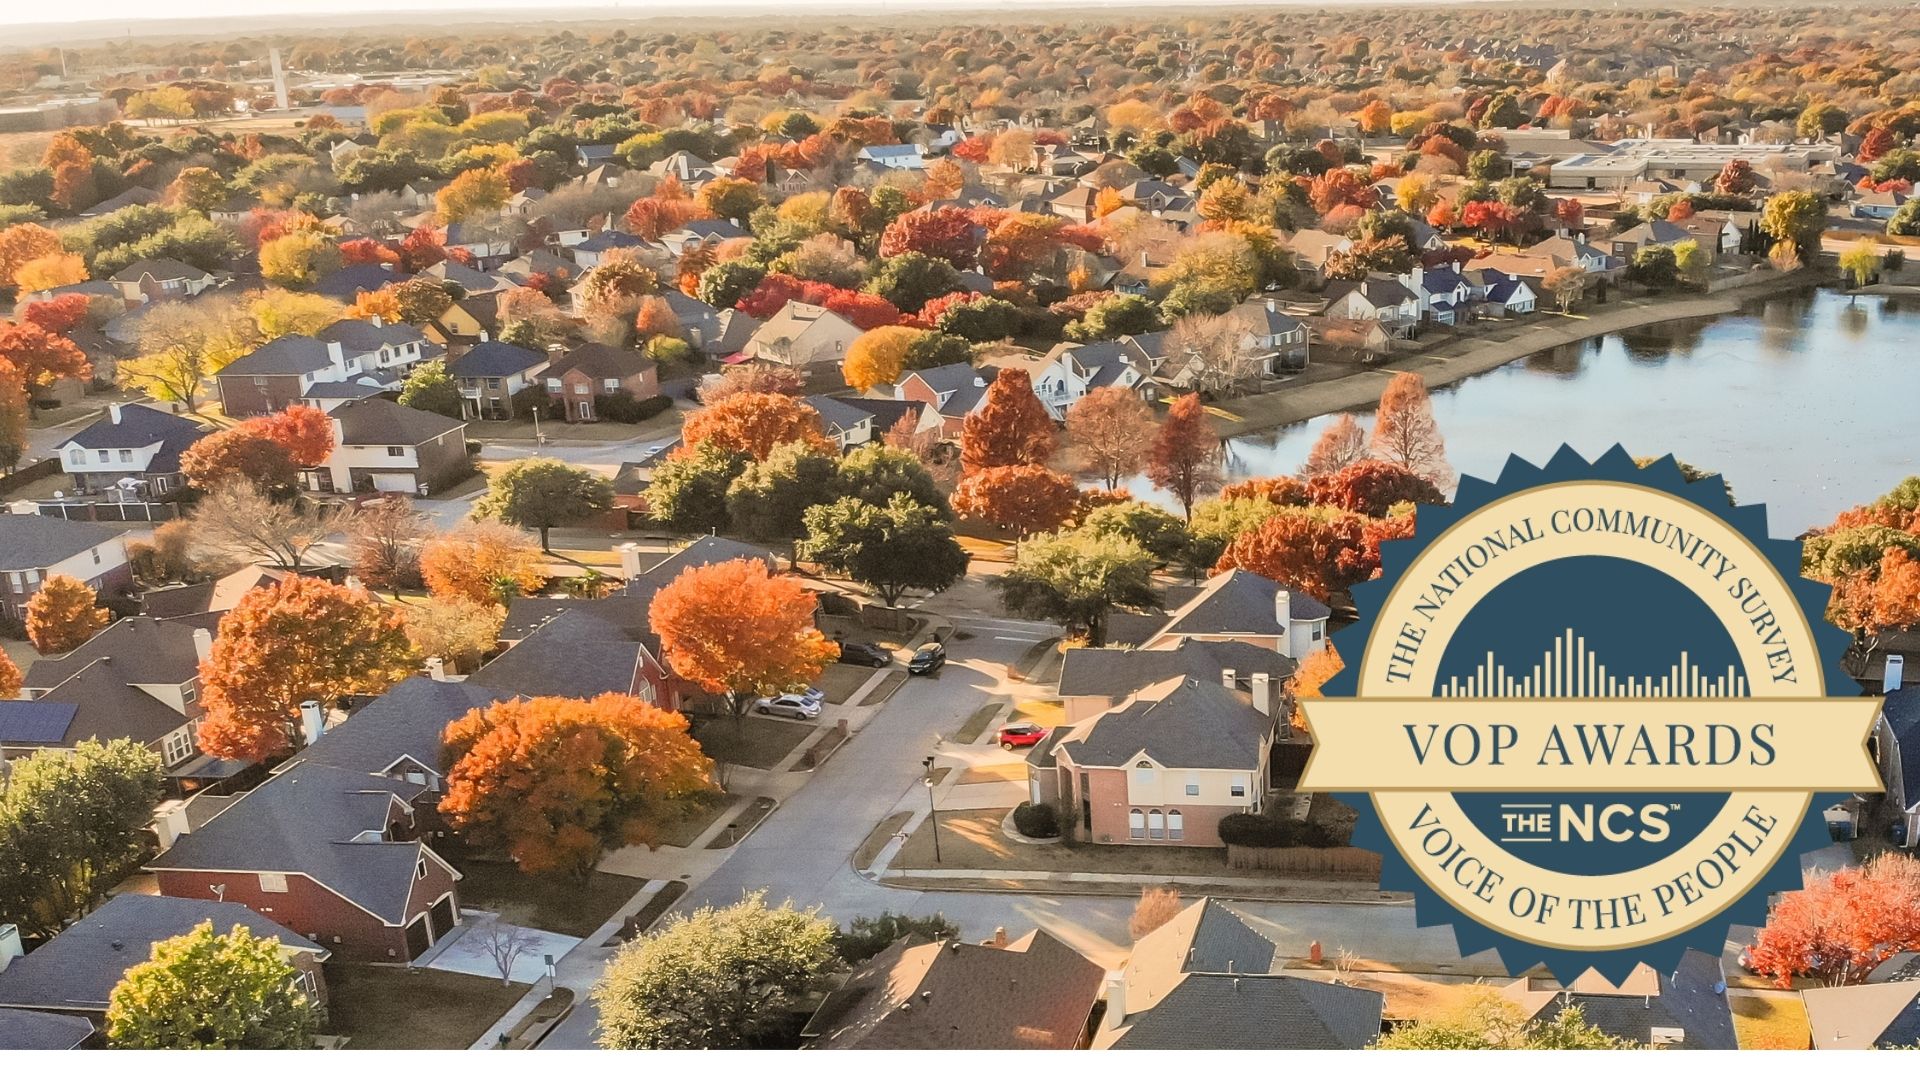 How Flower Mound Transformed Resident Satisfaction With 'Wildly Successful and Well-Attended